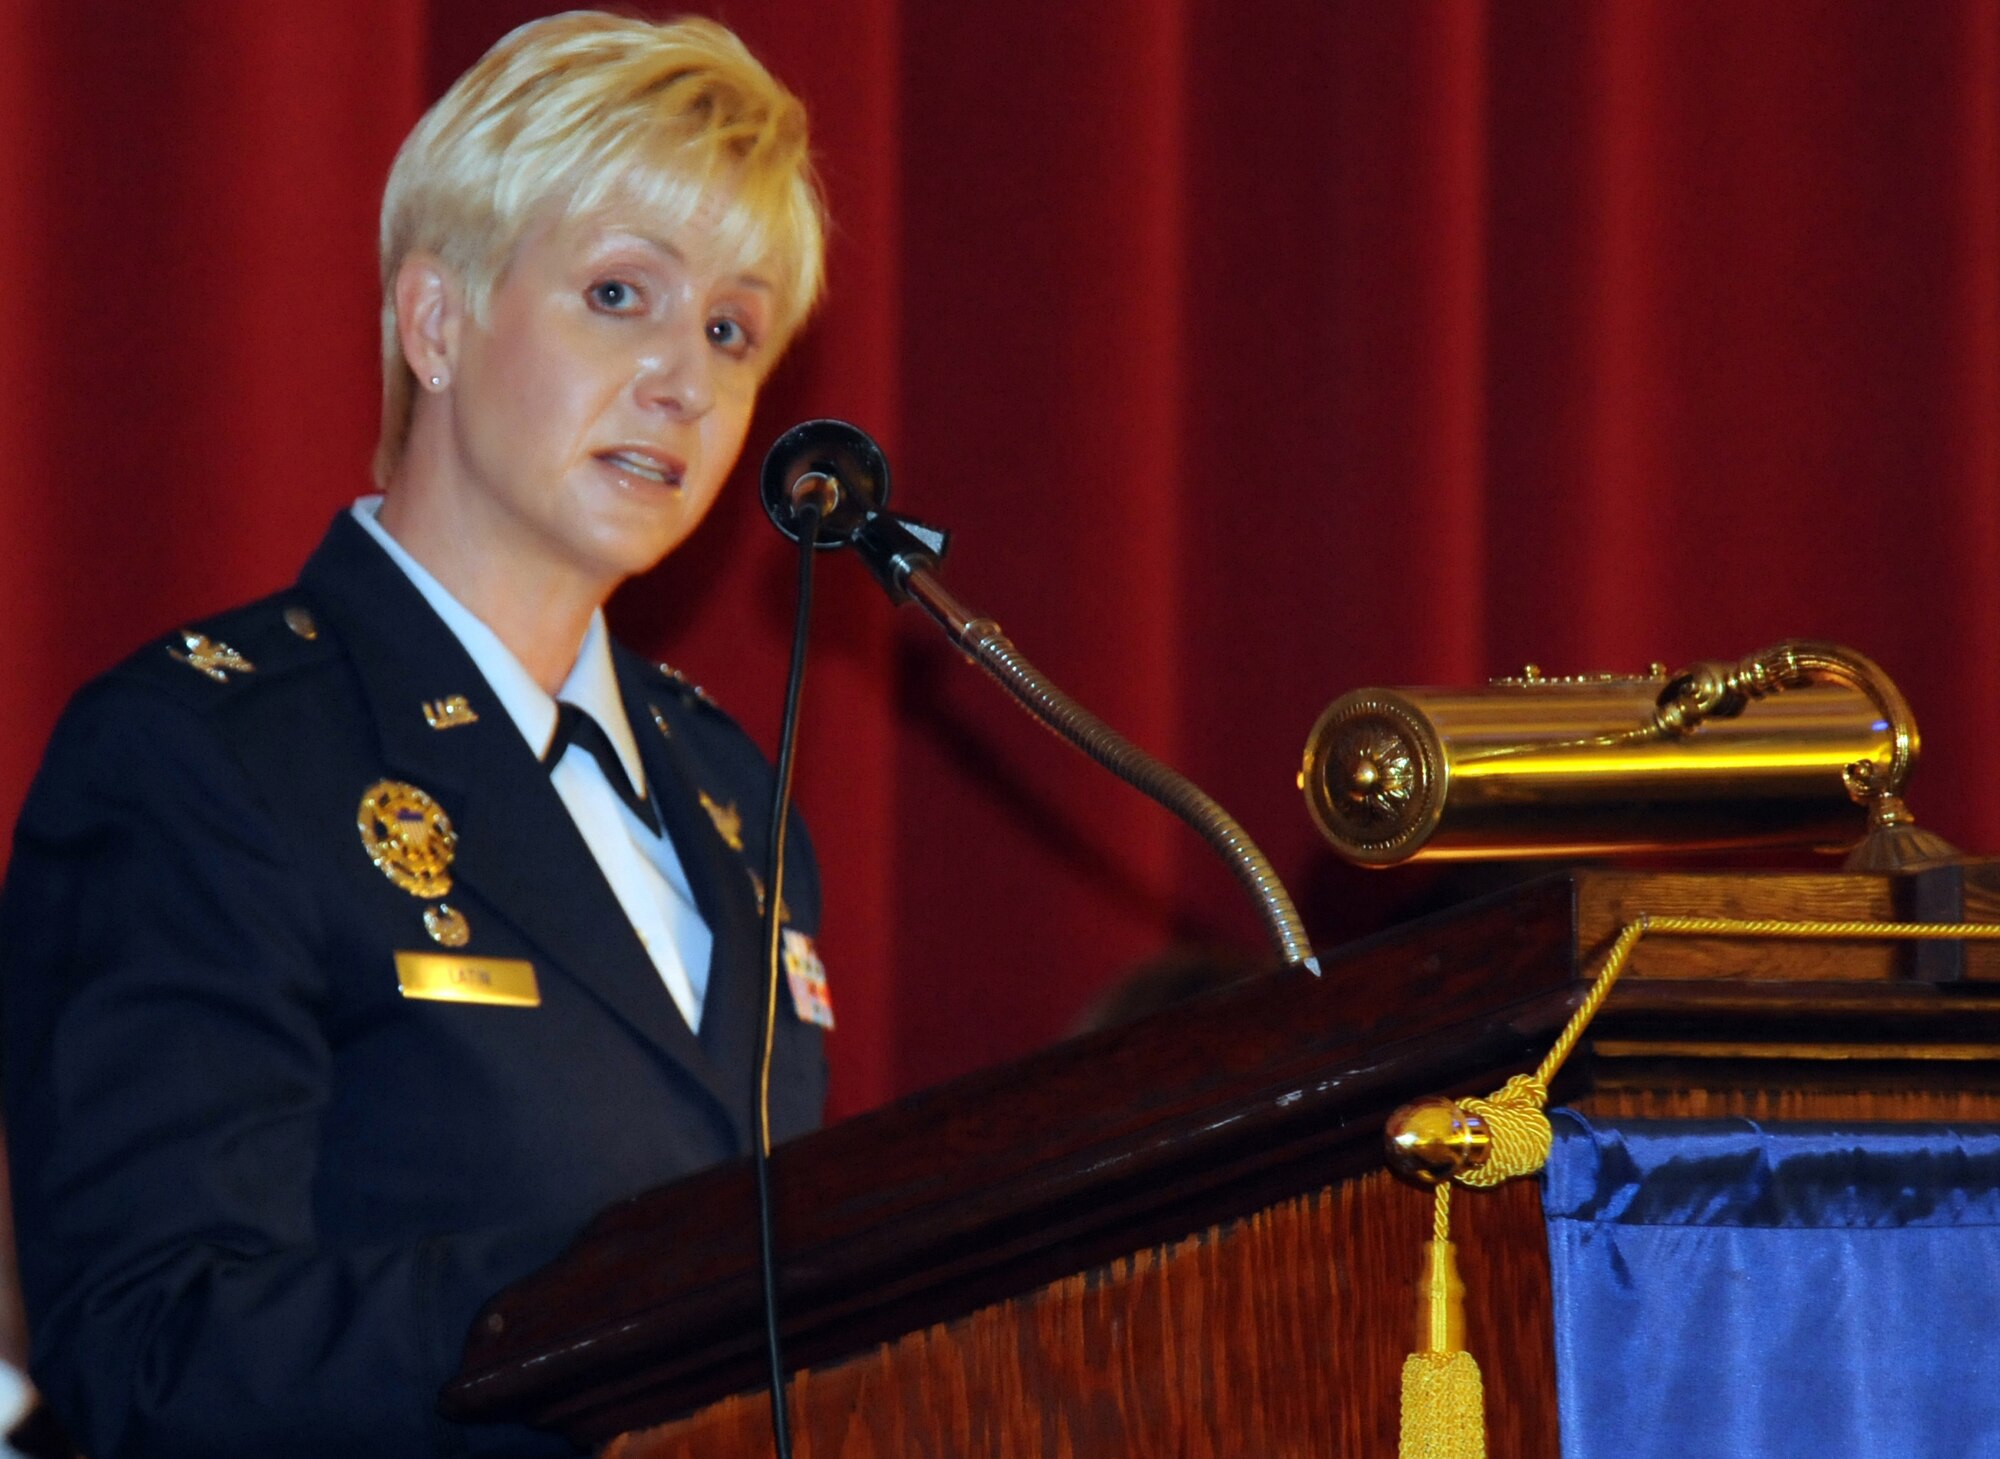 Col. Anita Latin, 61st Air Base Wing commander, spoke at the 80th Anniversary of American Legion Post 43’s Clubhouse dedication celebration, July 4. (Photo by Atiba S. Copeland)